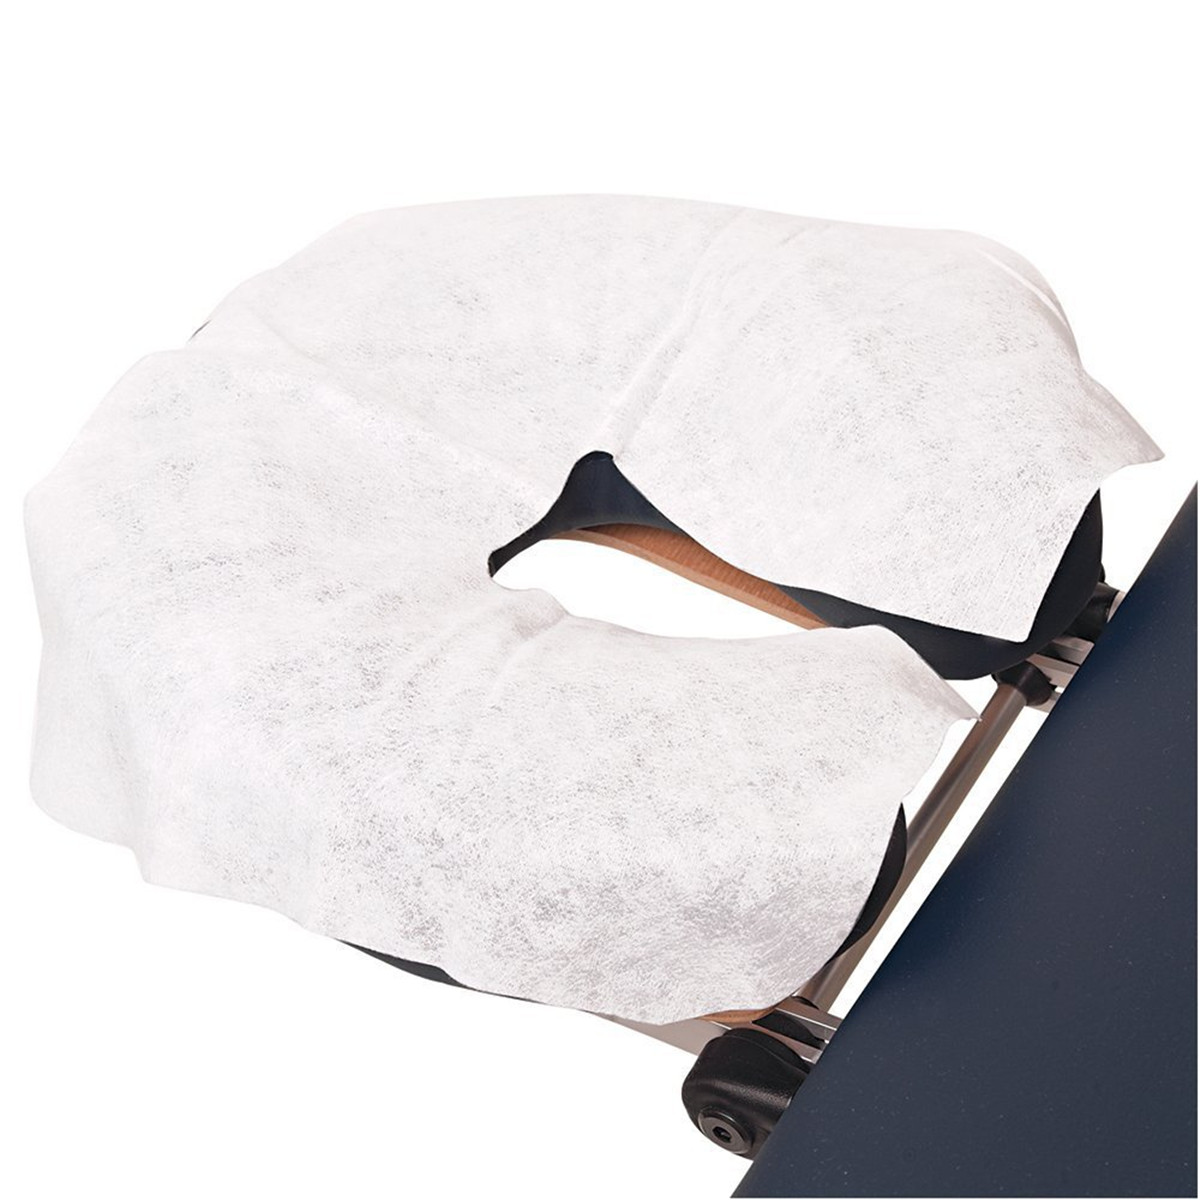 100Pcs-Ultra-Soft-Disposable-Face-Cradle-Covers-Absorbent-Fabric-Face-Covers-Headrest-Covers-for-Mas-1419576